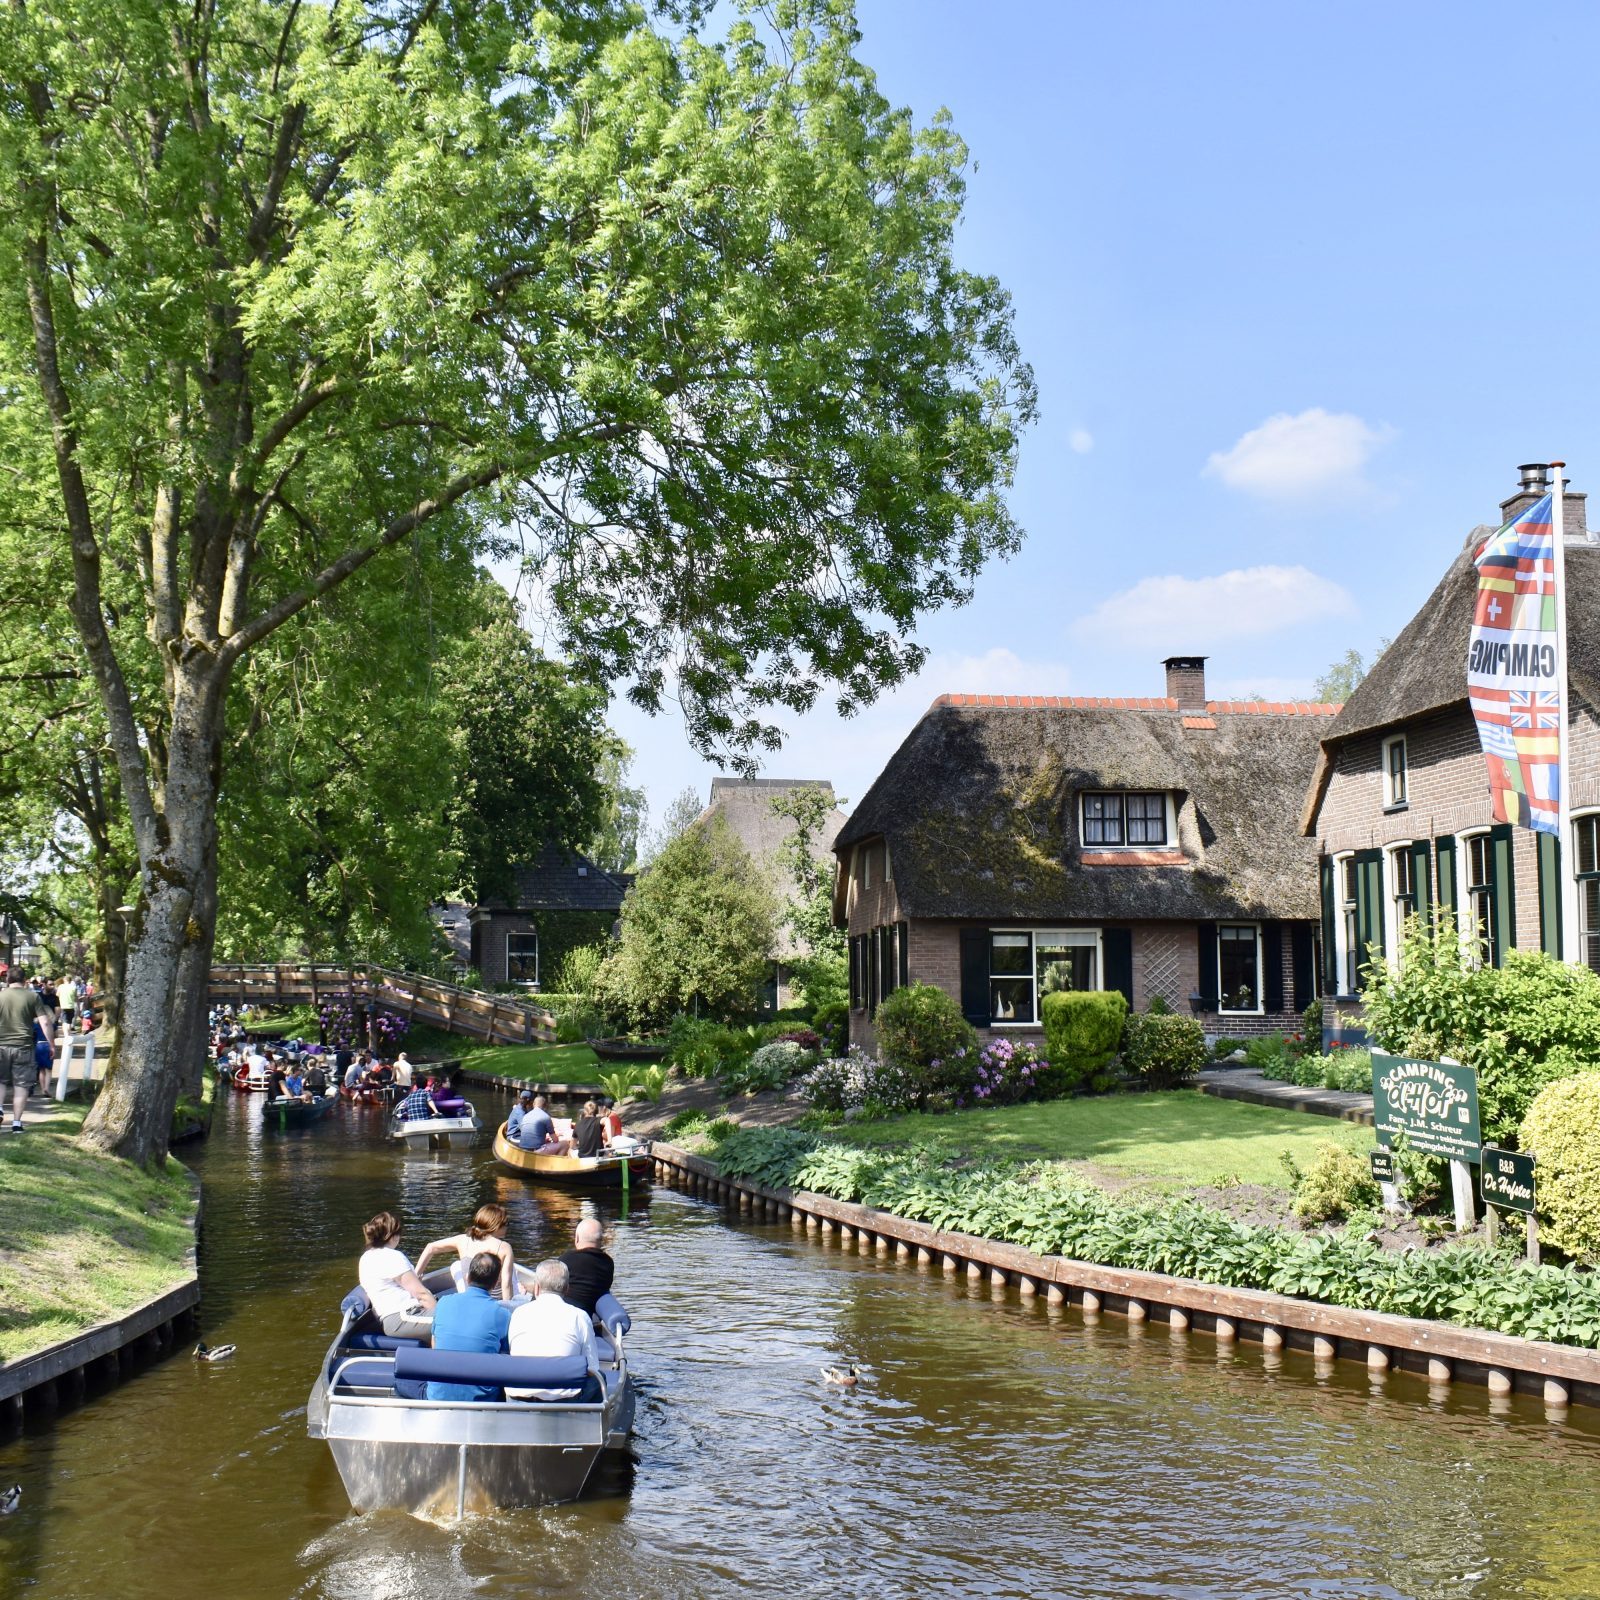 6-facts-you-should-know-when-visiting-the-giethoorn-netherlands